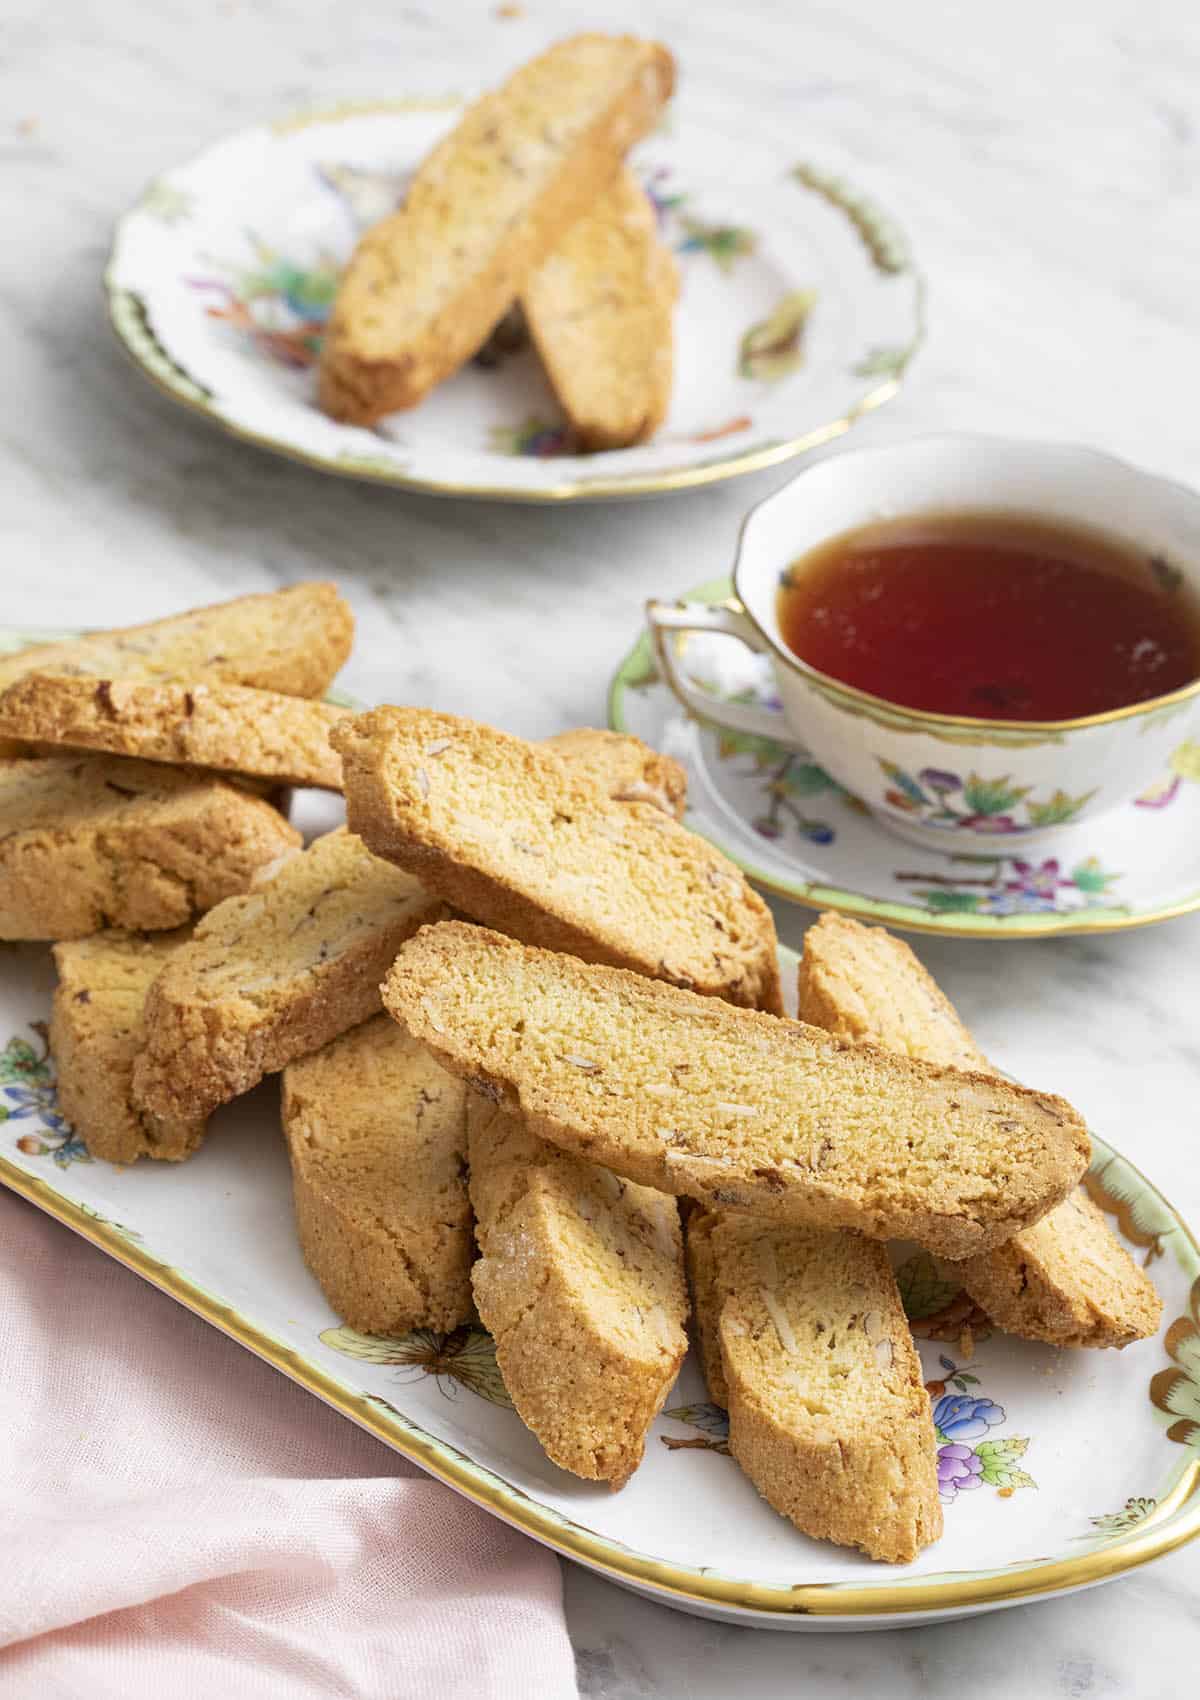 A group of delicious almond biscotti on a porcelain serving tray next to a teacup.